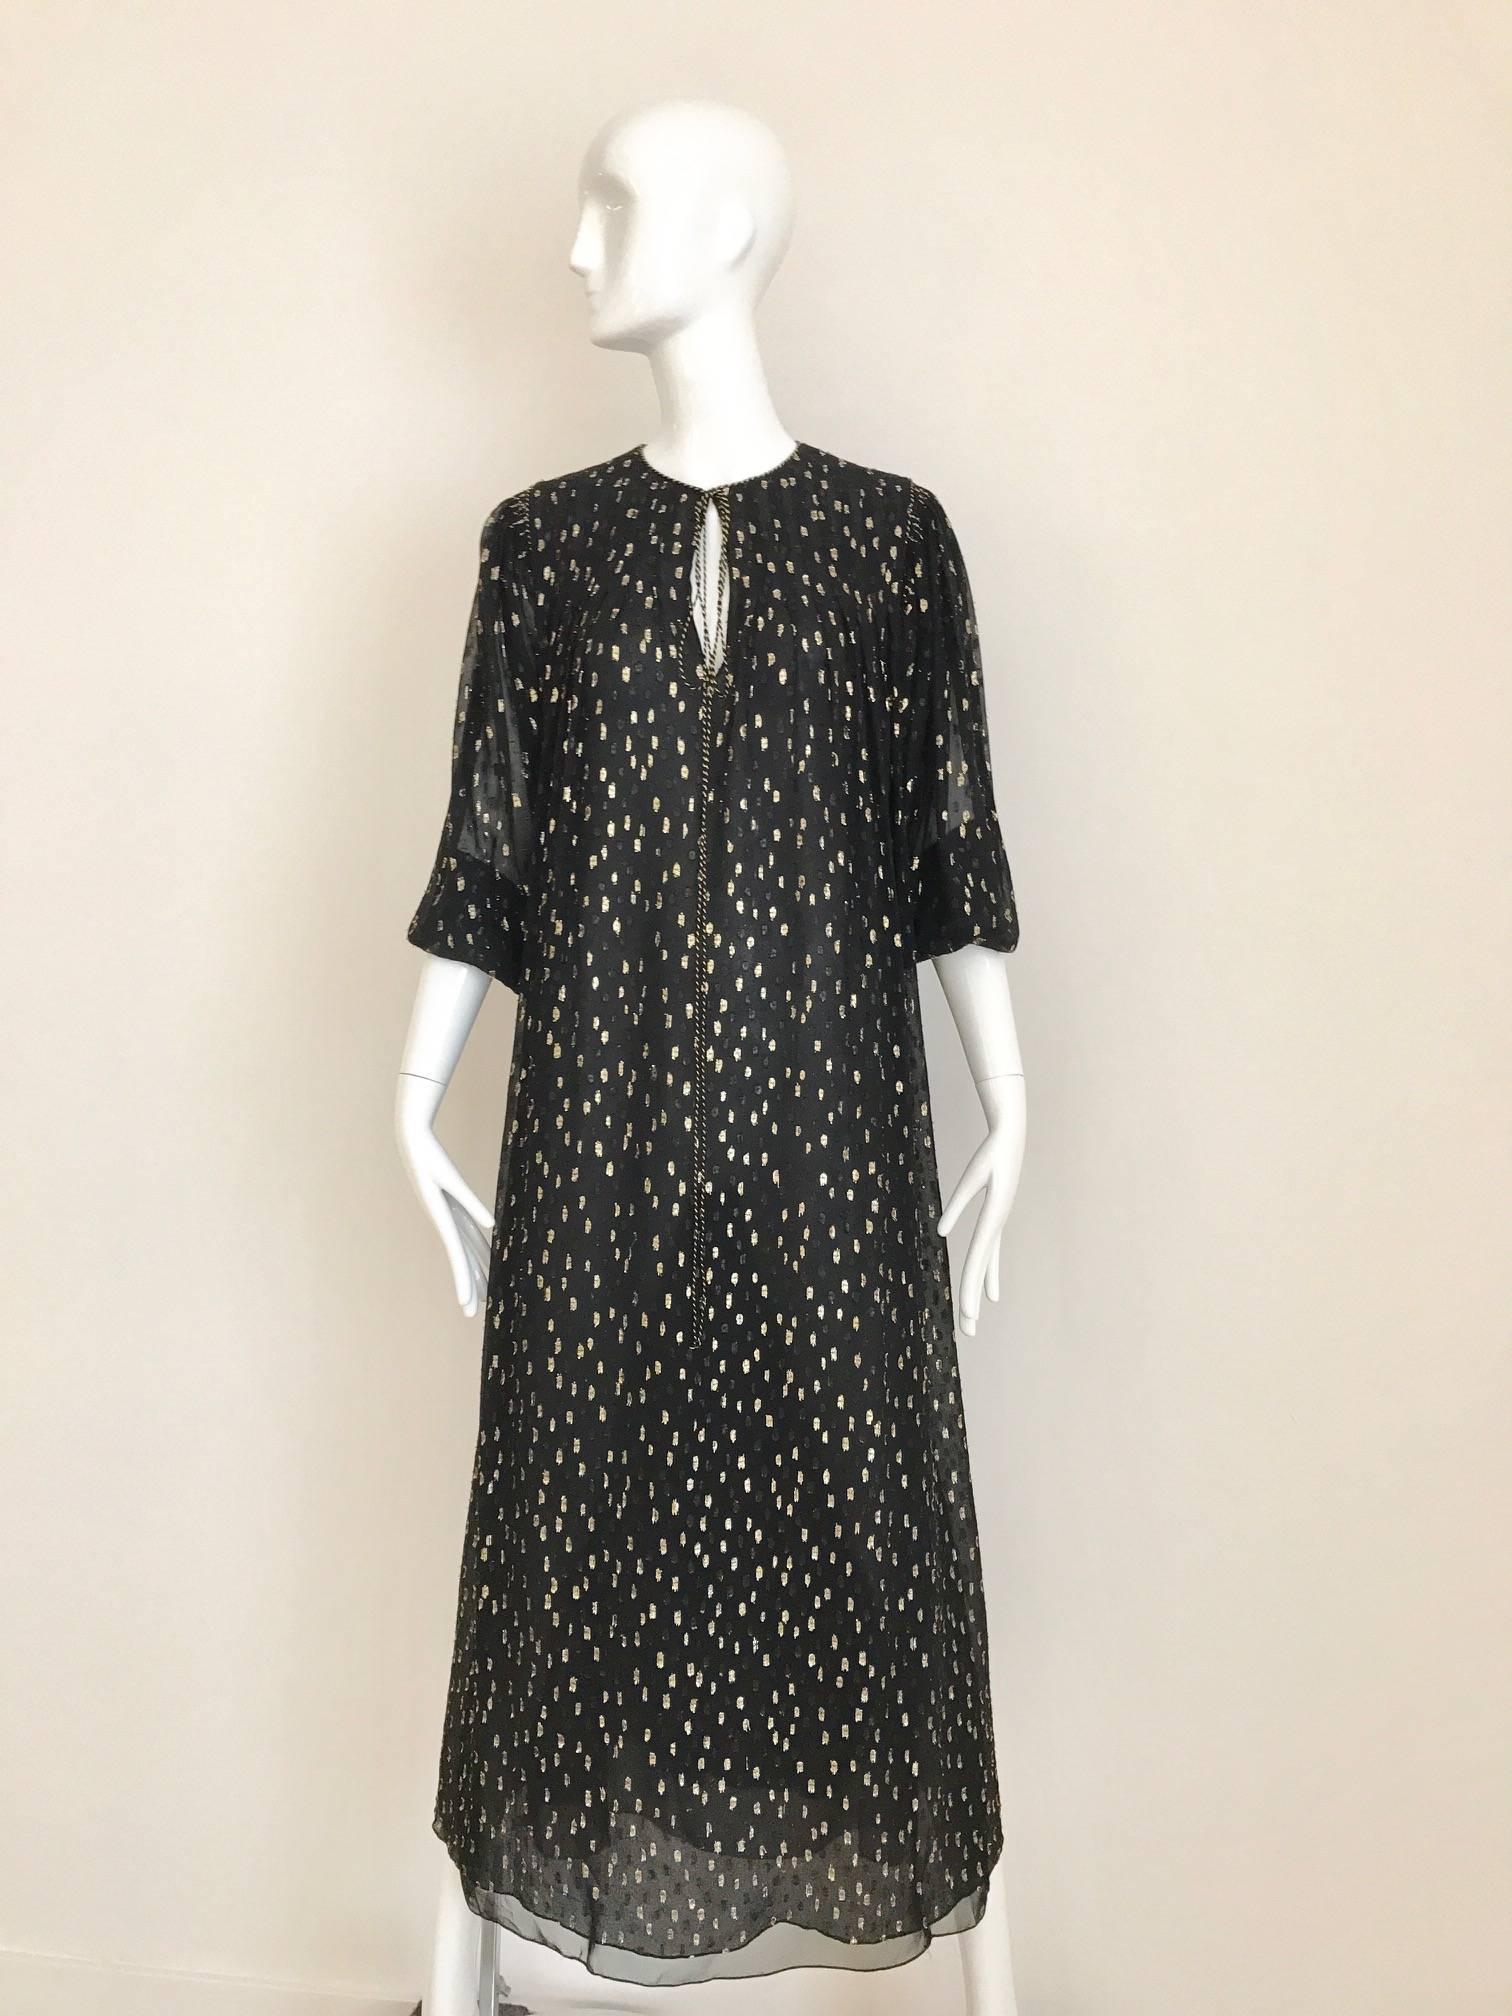 Vintage Oscar De La Renta 1970s Black and gold silk metallic long sleeve maxi dress.  Tie on the neckline with braided silk cord. Perfect for summer vacation  evening dress.
Size:  LARGE 
Bust: 41 inch

*** This Garment has been professionally Dry